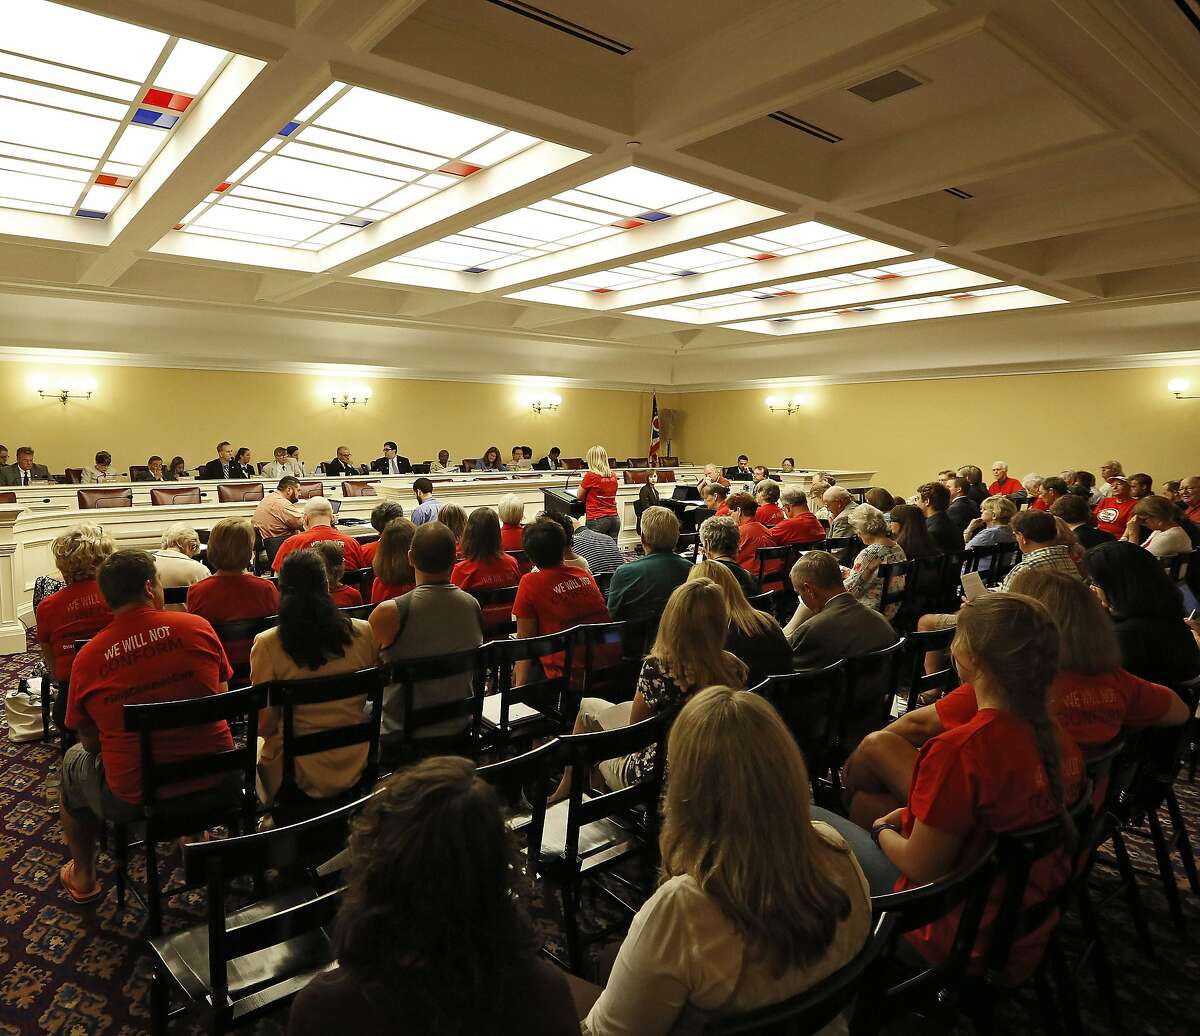 ADVANCE FOR SUNDAY, AUG. 31 AND THEREAFTER - This photo taken Monday, Aug. 18, 2014 shows hearings on legislation to repeal Common Core academic standards in the House Finance Hearing Room at Ohio Statehouse in Columbus, Ohio. Millions of students will sit down at computers this year to take new tests rooted in the Common Core standards for math and reading, but policymakers in many states are having buyer's remorse. The fight to repeal the standards has heated up in Ohio, where Republican legislators such as state Rep. Andy Thompson saying it's kind of “creepy the way this whole thing landed in Ohio with all the things prepackaged.” (AP Photo/Columbus Dispatch, Kyle Robertson)